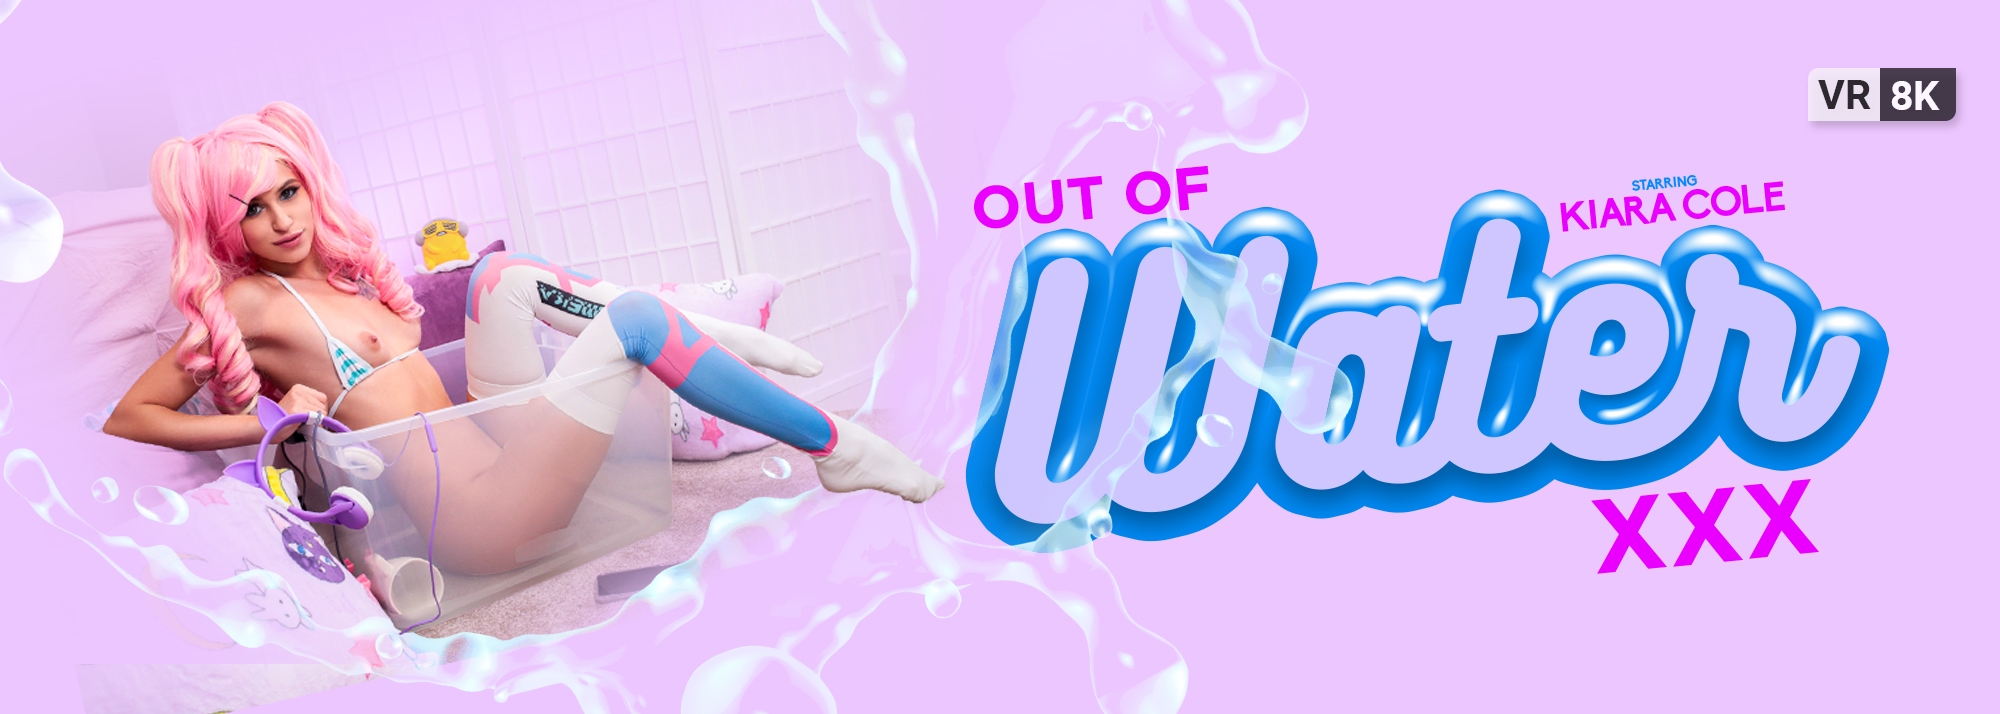 Out of Water XXX - VR Porn Video, Starring Kiara Cole VR